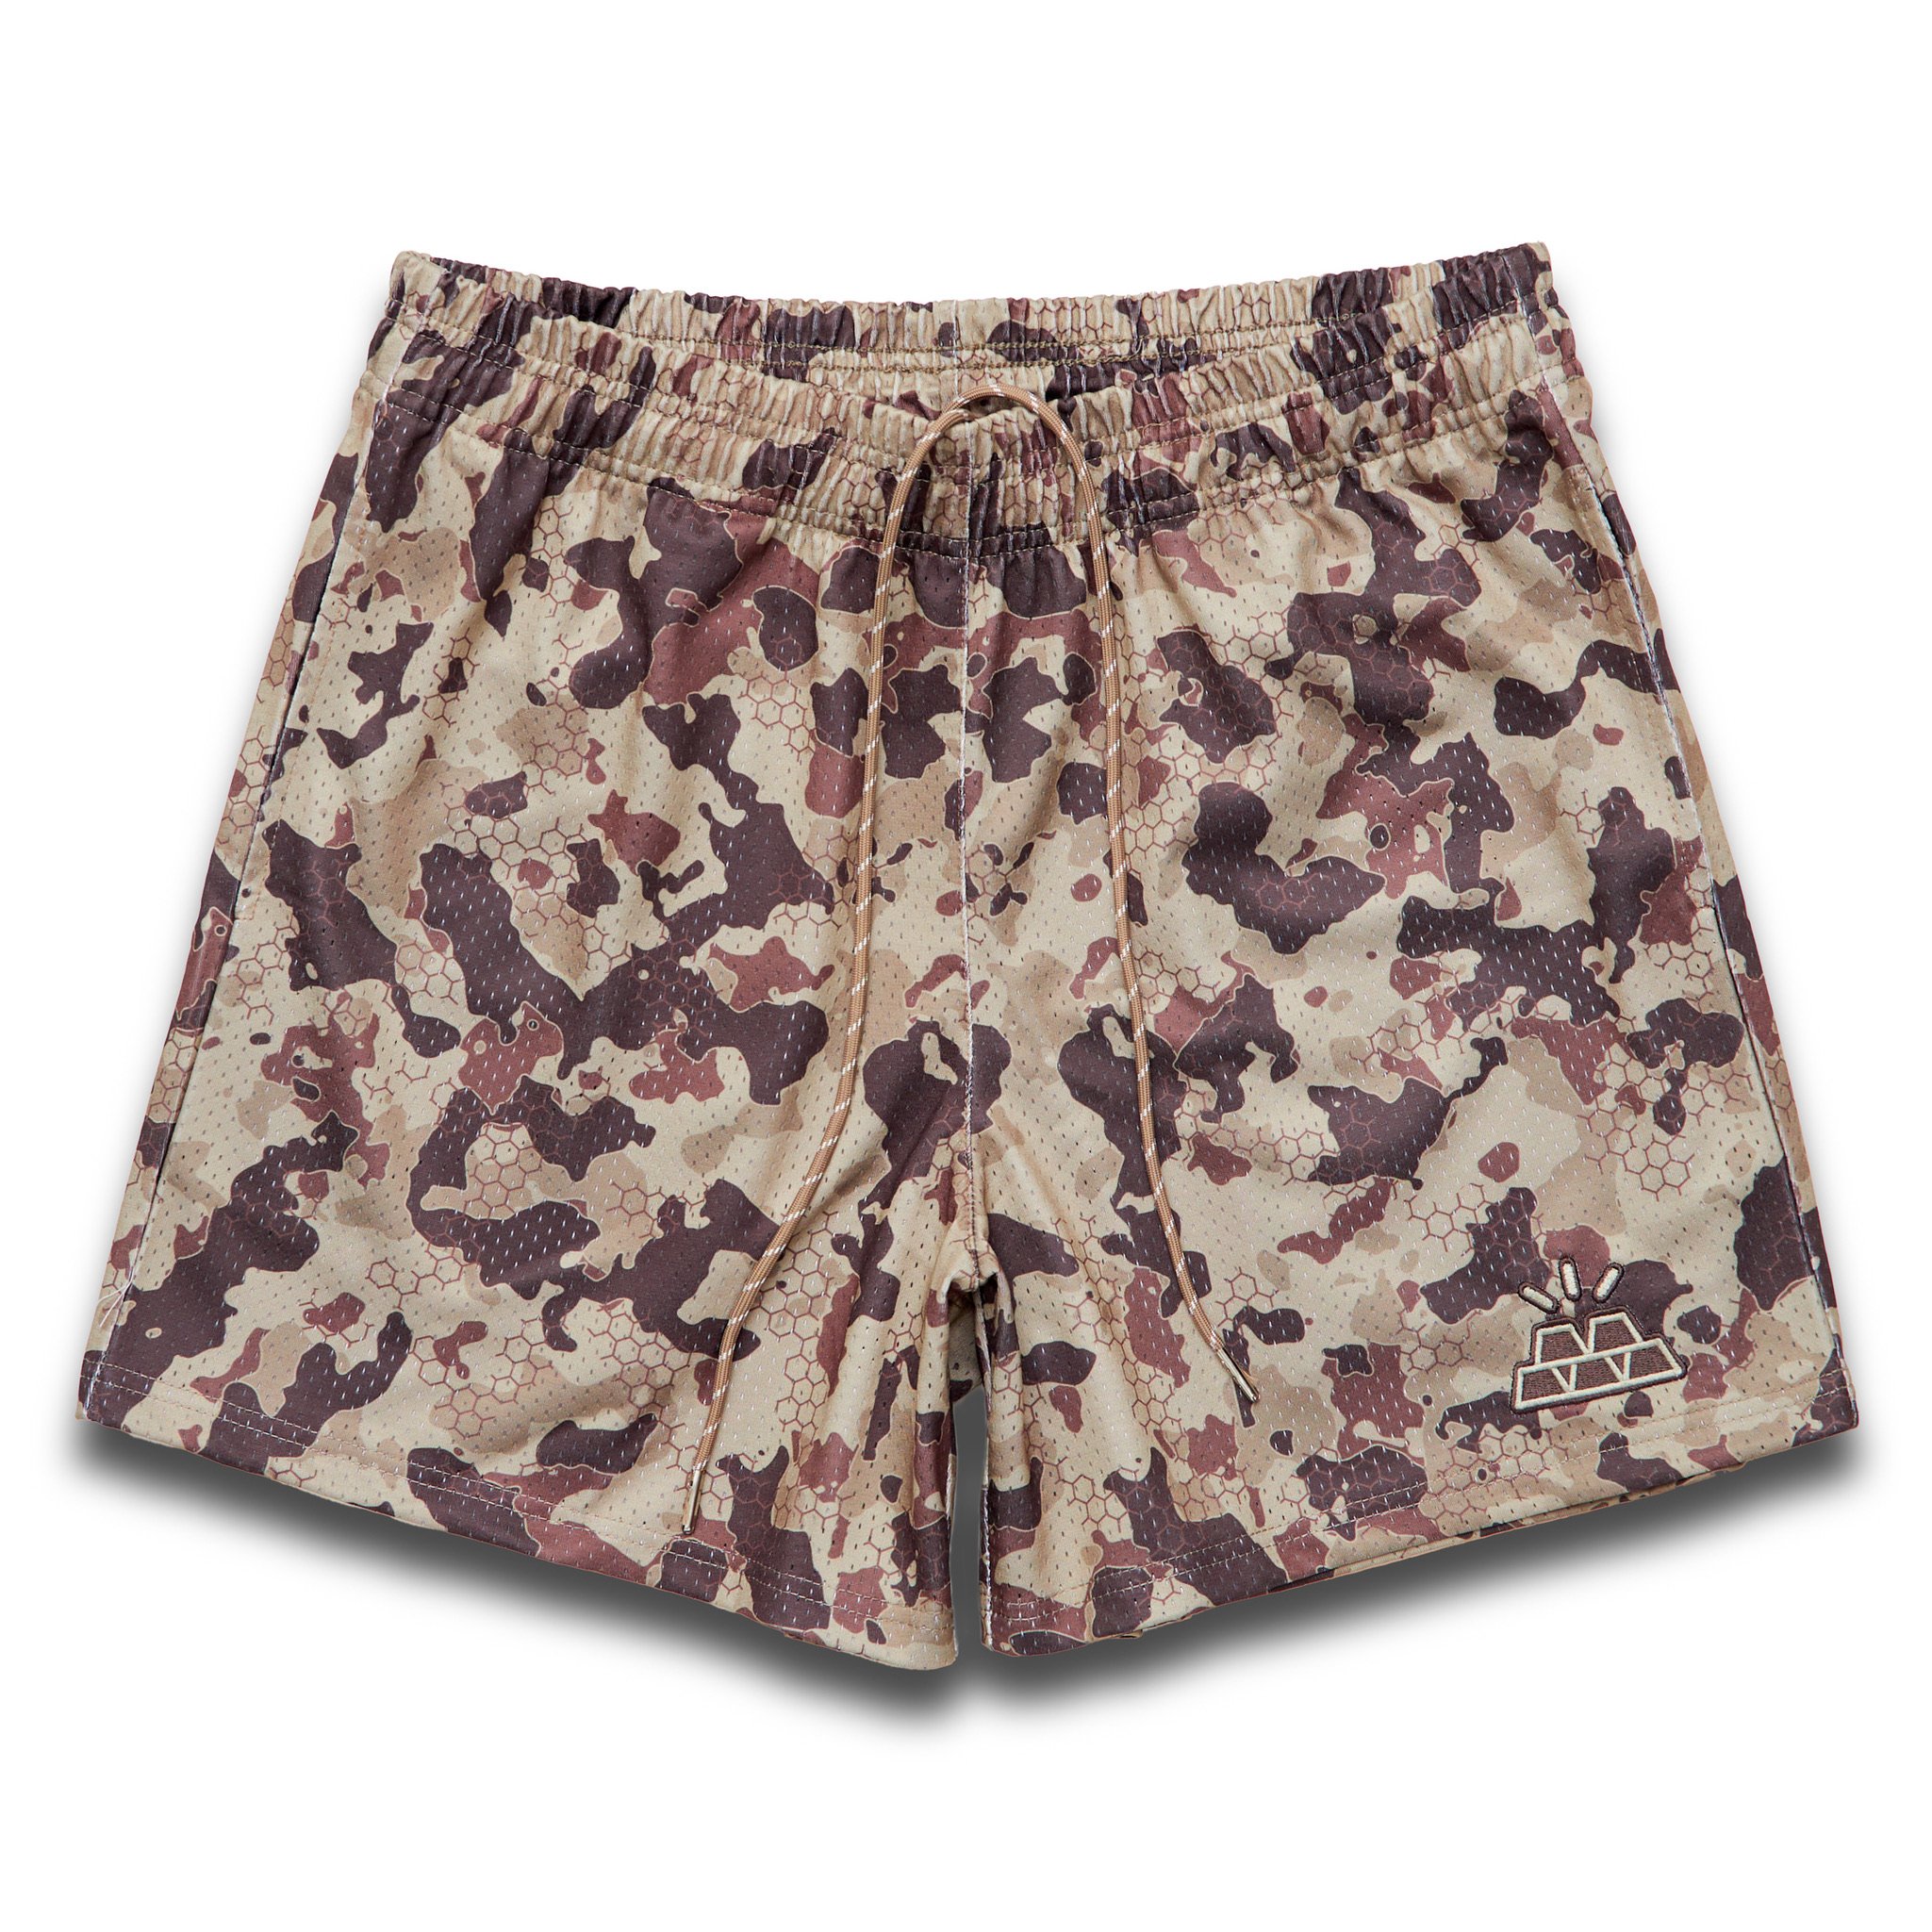 Mesh Shorts | Sublimated Design | 190g Weight Fabric | GSM